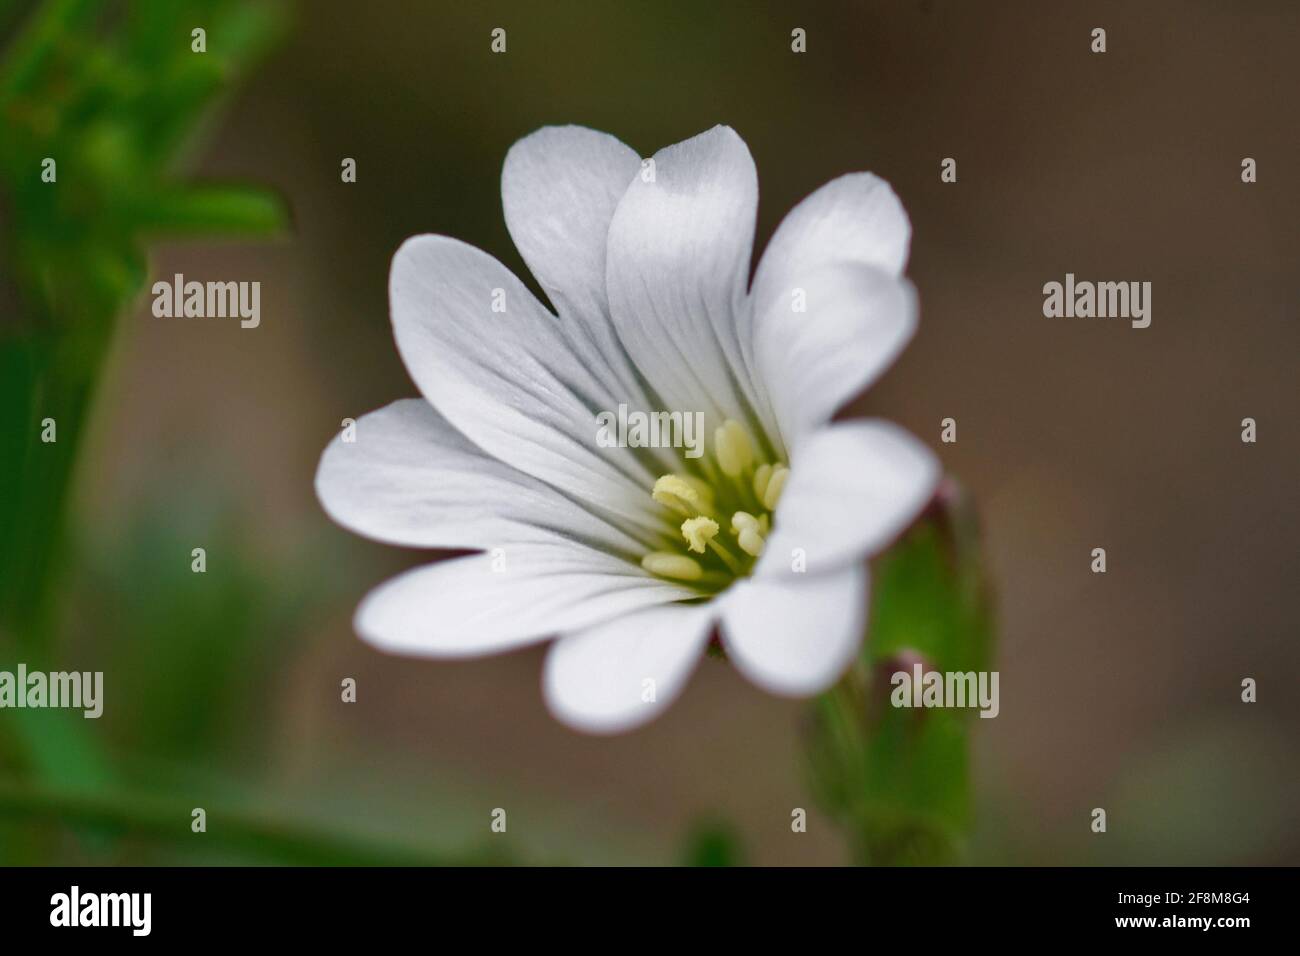 White flower of a field mouse-ear or chickweed (Cerastium arvense) in the blurred background Stock Photo